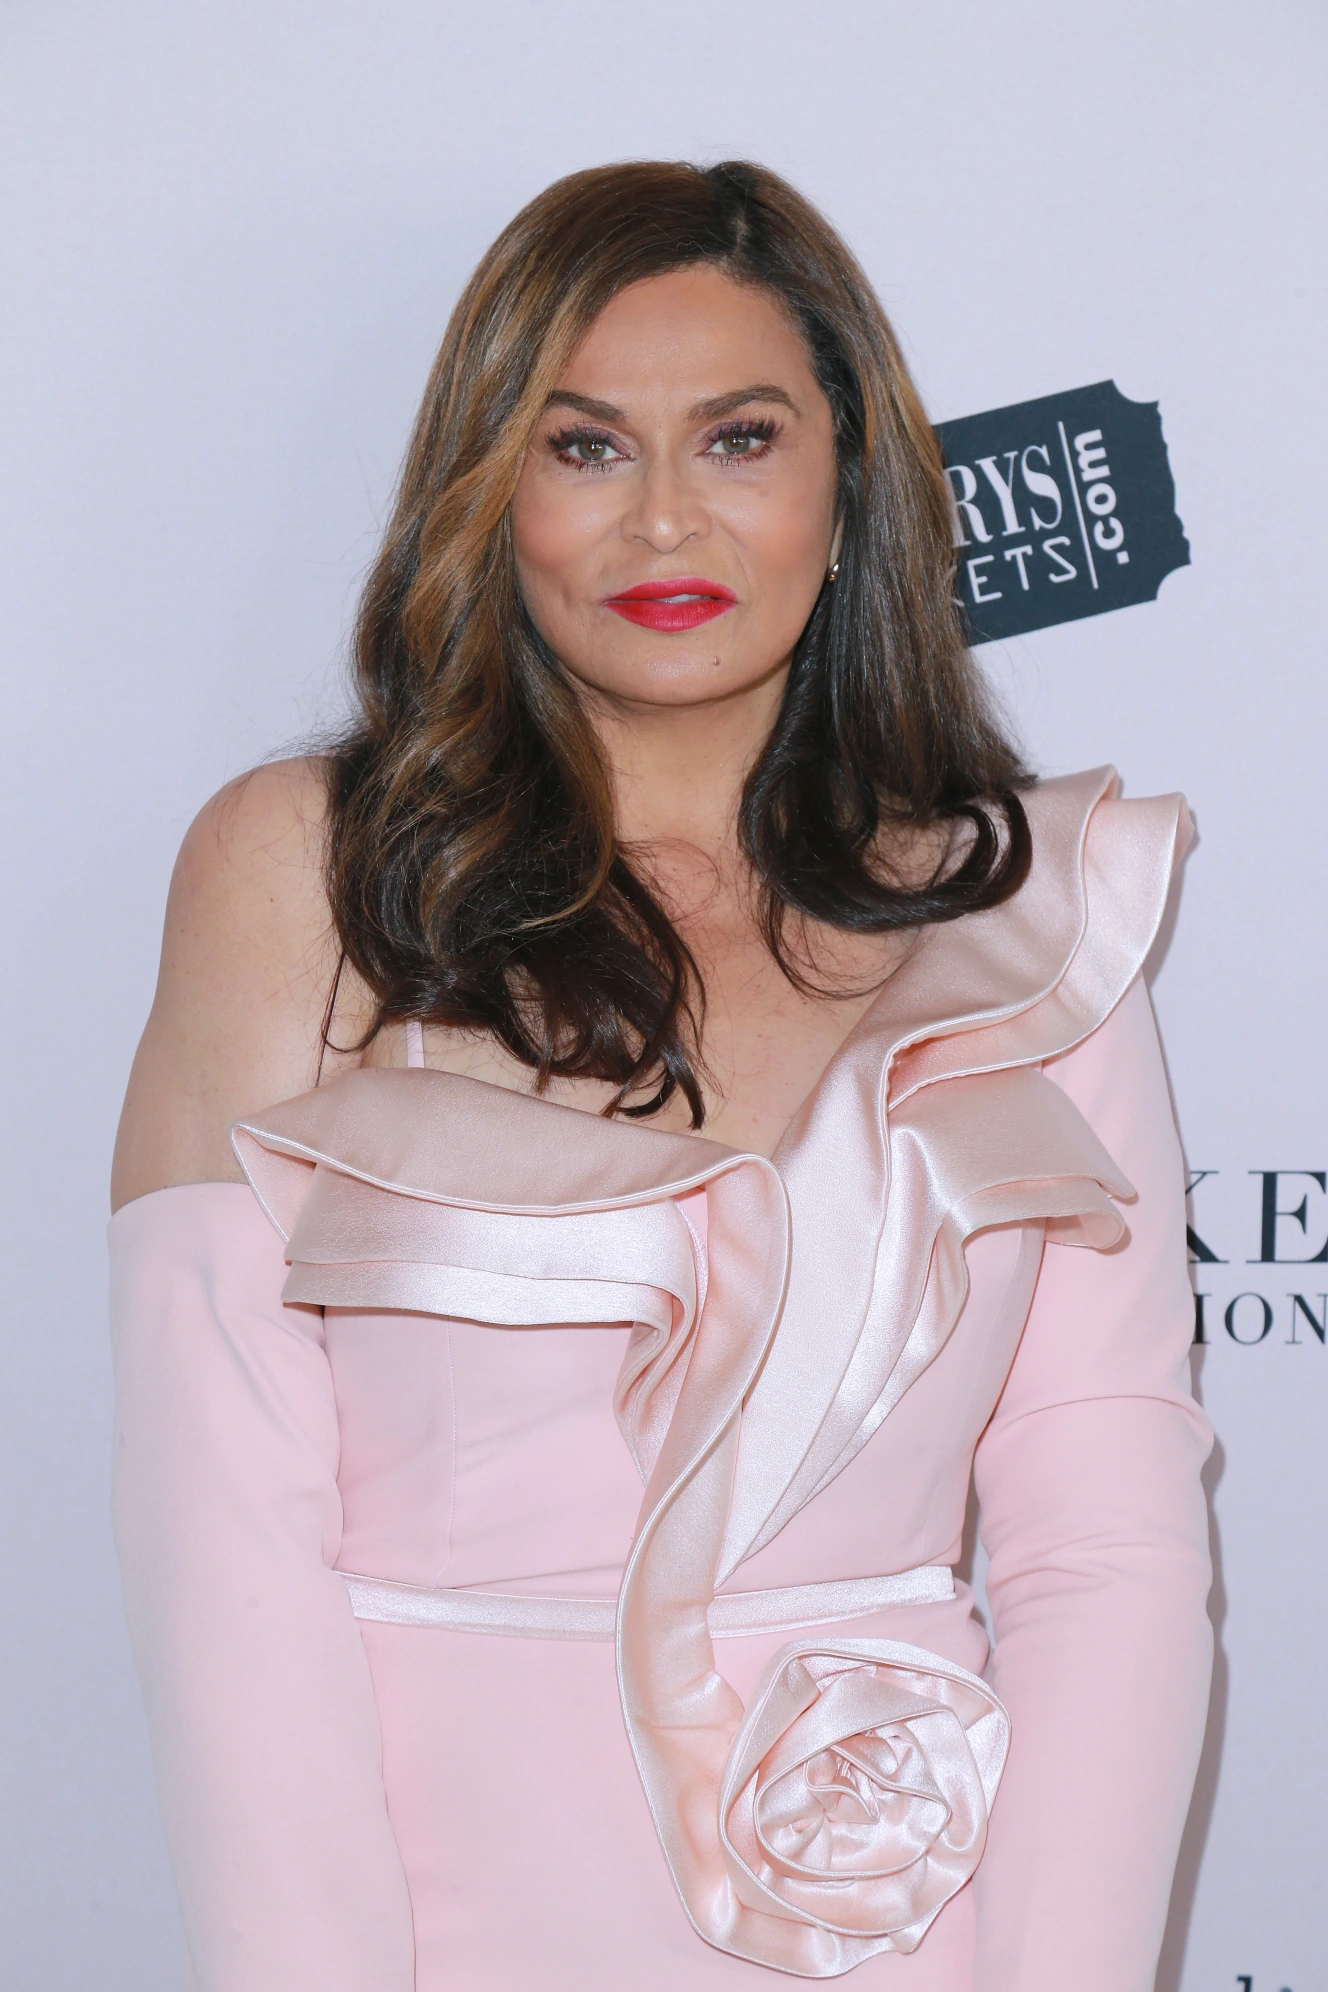 Tina Knowles’ LA Home Gets Robbed, $1 Million in Cash and Jewelry Stolen